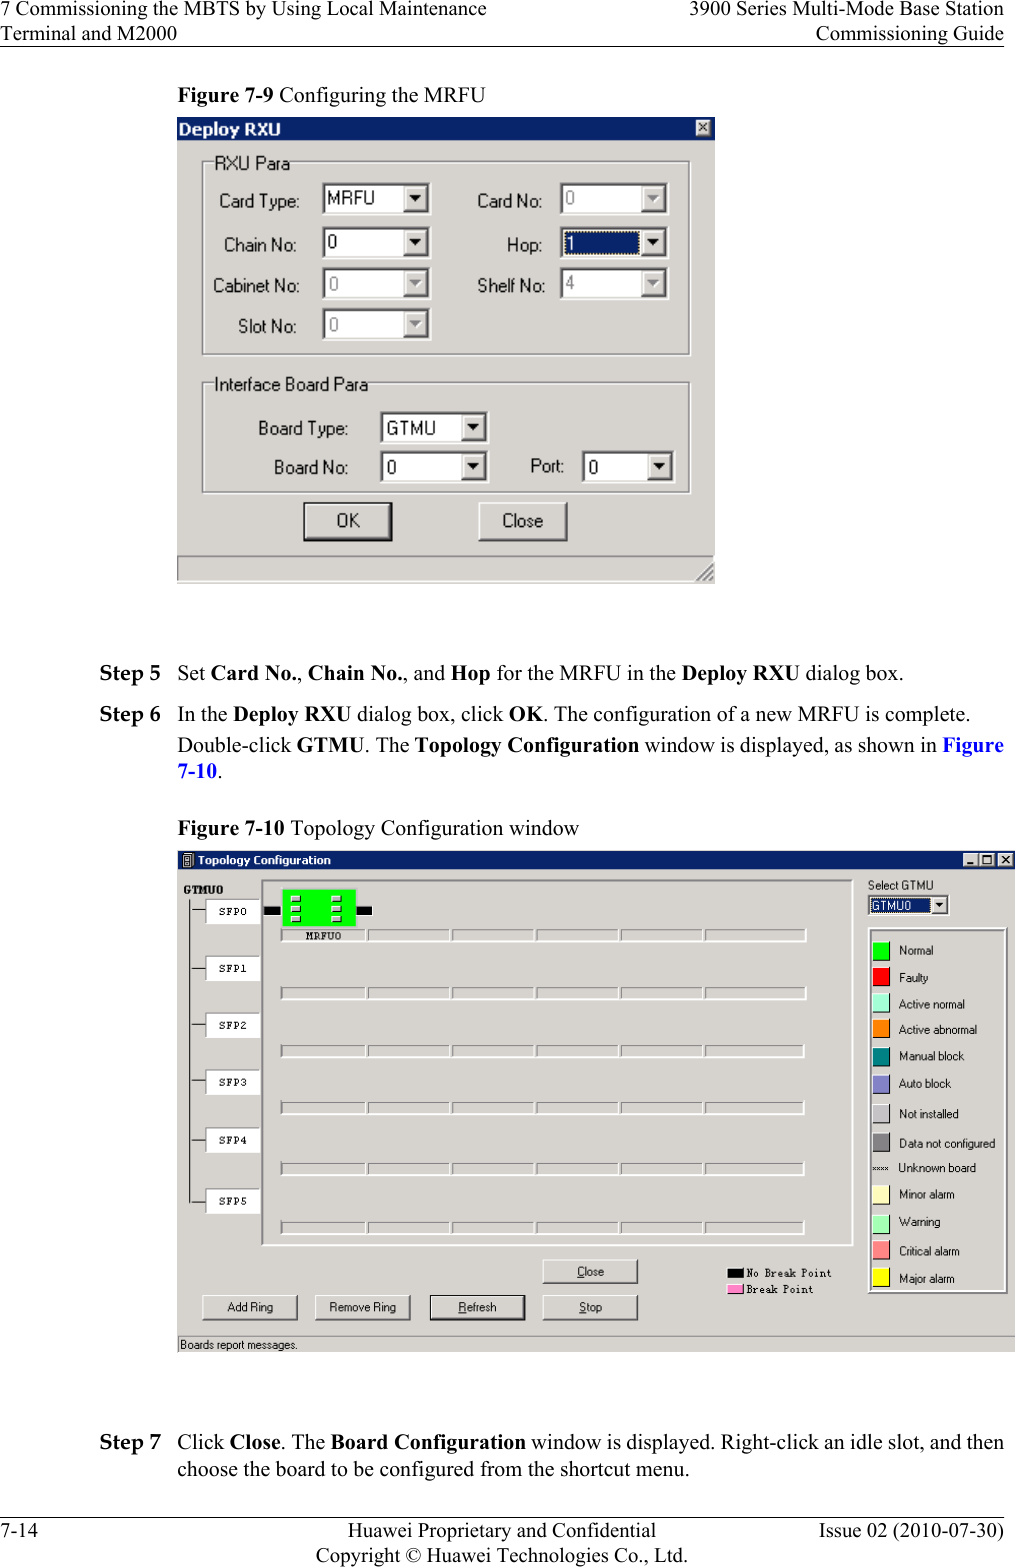 Figure 7-9 Configuring the MRFU Step 5 Set Card No., Chain No., and Hop for the MRFU in the Deploy RXU dialog box.Step 6 In the Deploy RXU dialog box, click OK. The configuration of a new MRFU is complete.Double-click GTMU. The Topology Configuration window is displayed, as shown in Figure7-10.Figure 7-10 Topology Configuration window Step 7 Click Close. The Board Configuration window is displayed. Right-click an idle slot, and thenchoose the board to be configured from the shortcut menu.7 Commissioning the MBTS by Using Local MaintenanceTerminal and M20003900 Series Multi-Mode Base StationCommissioning Guide7-14 Huawei Proprietary and ConfidentialCopyright © Huawei Technologies Co., Ltd.Issue 02 (2010-07-30)